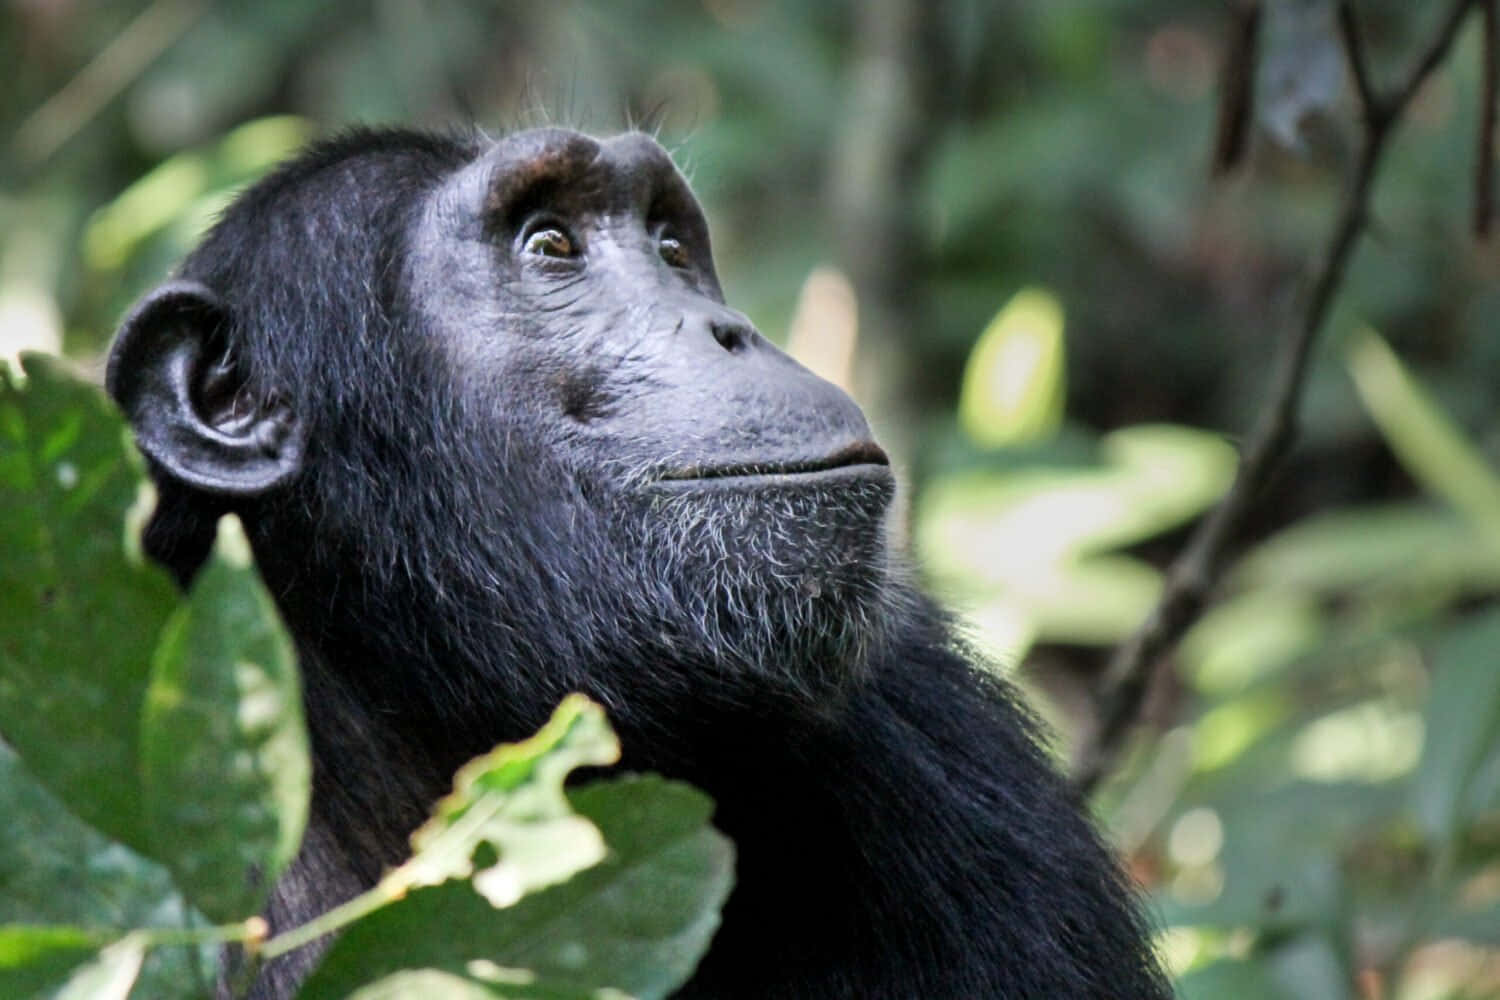 An inquisitive chimpanzee exploring the forest